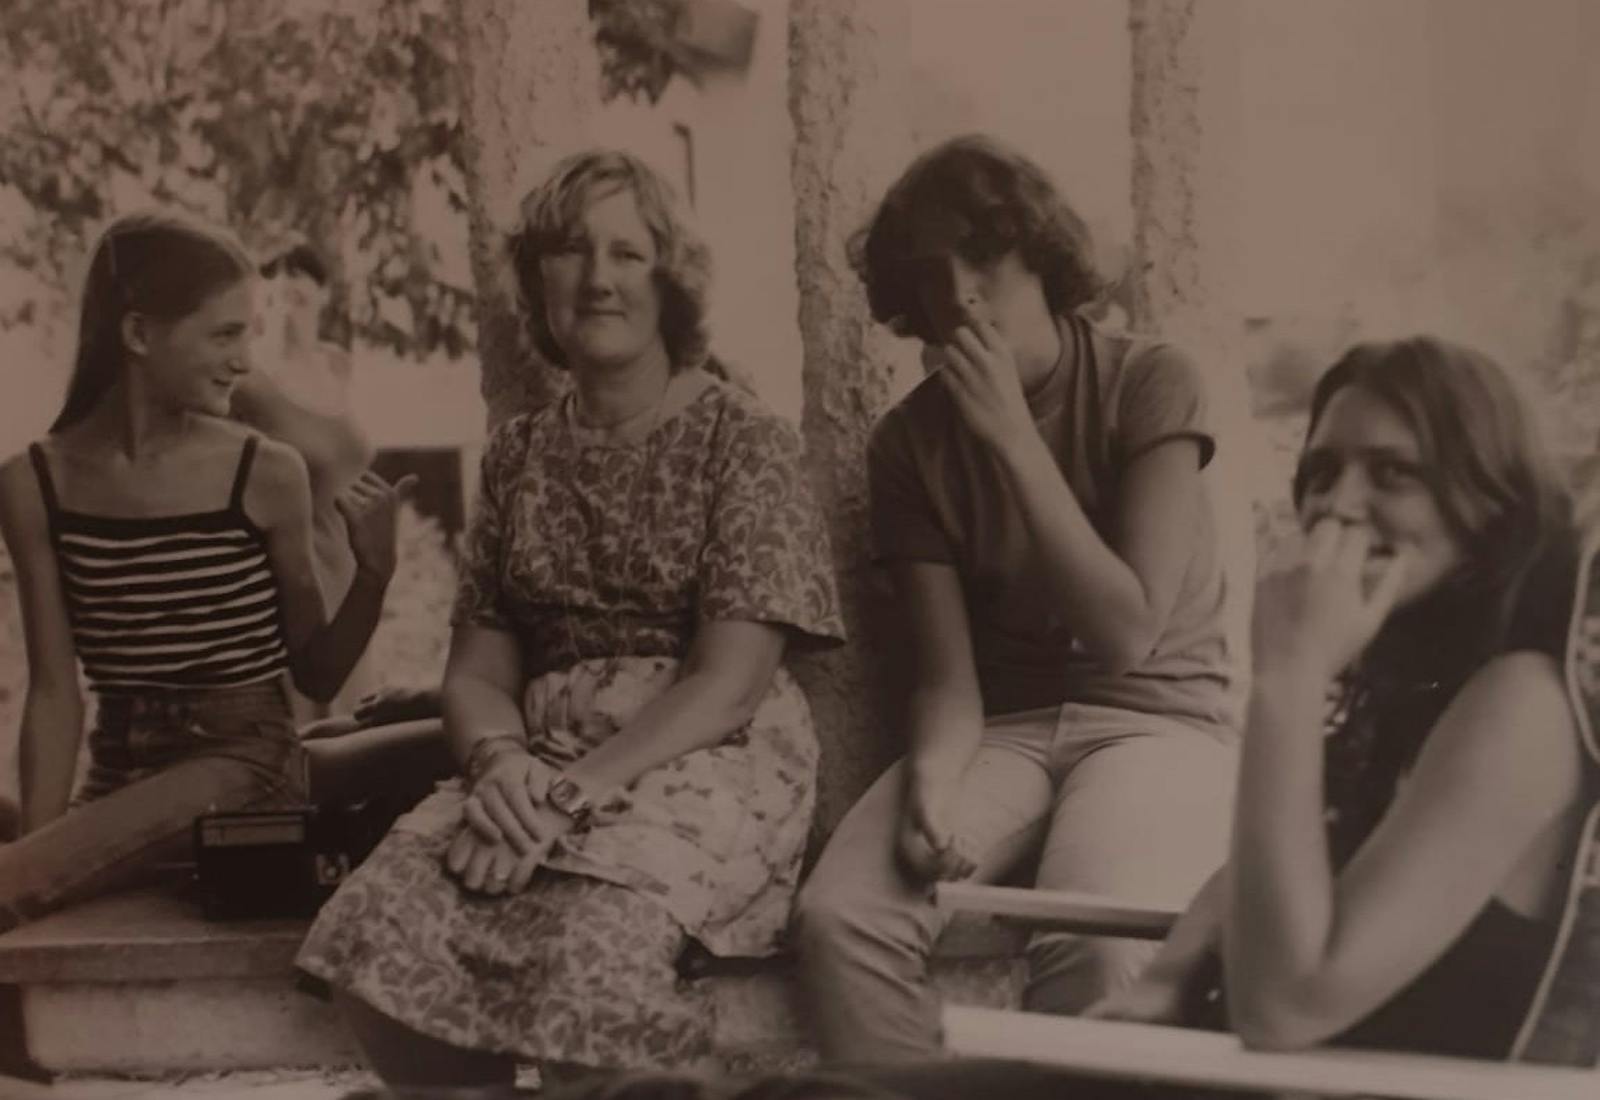 Abi's grandmother (center left) surrounded by her daughters.